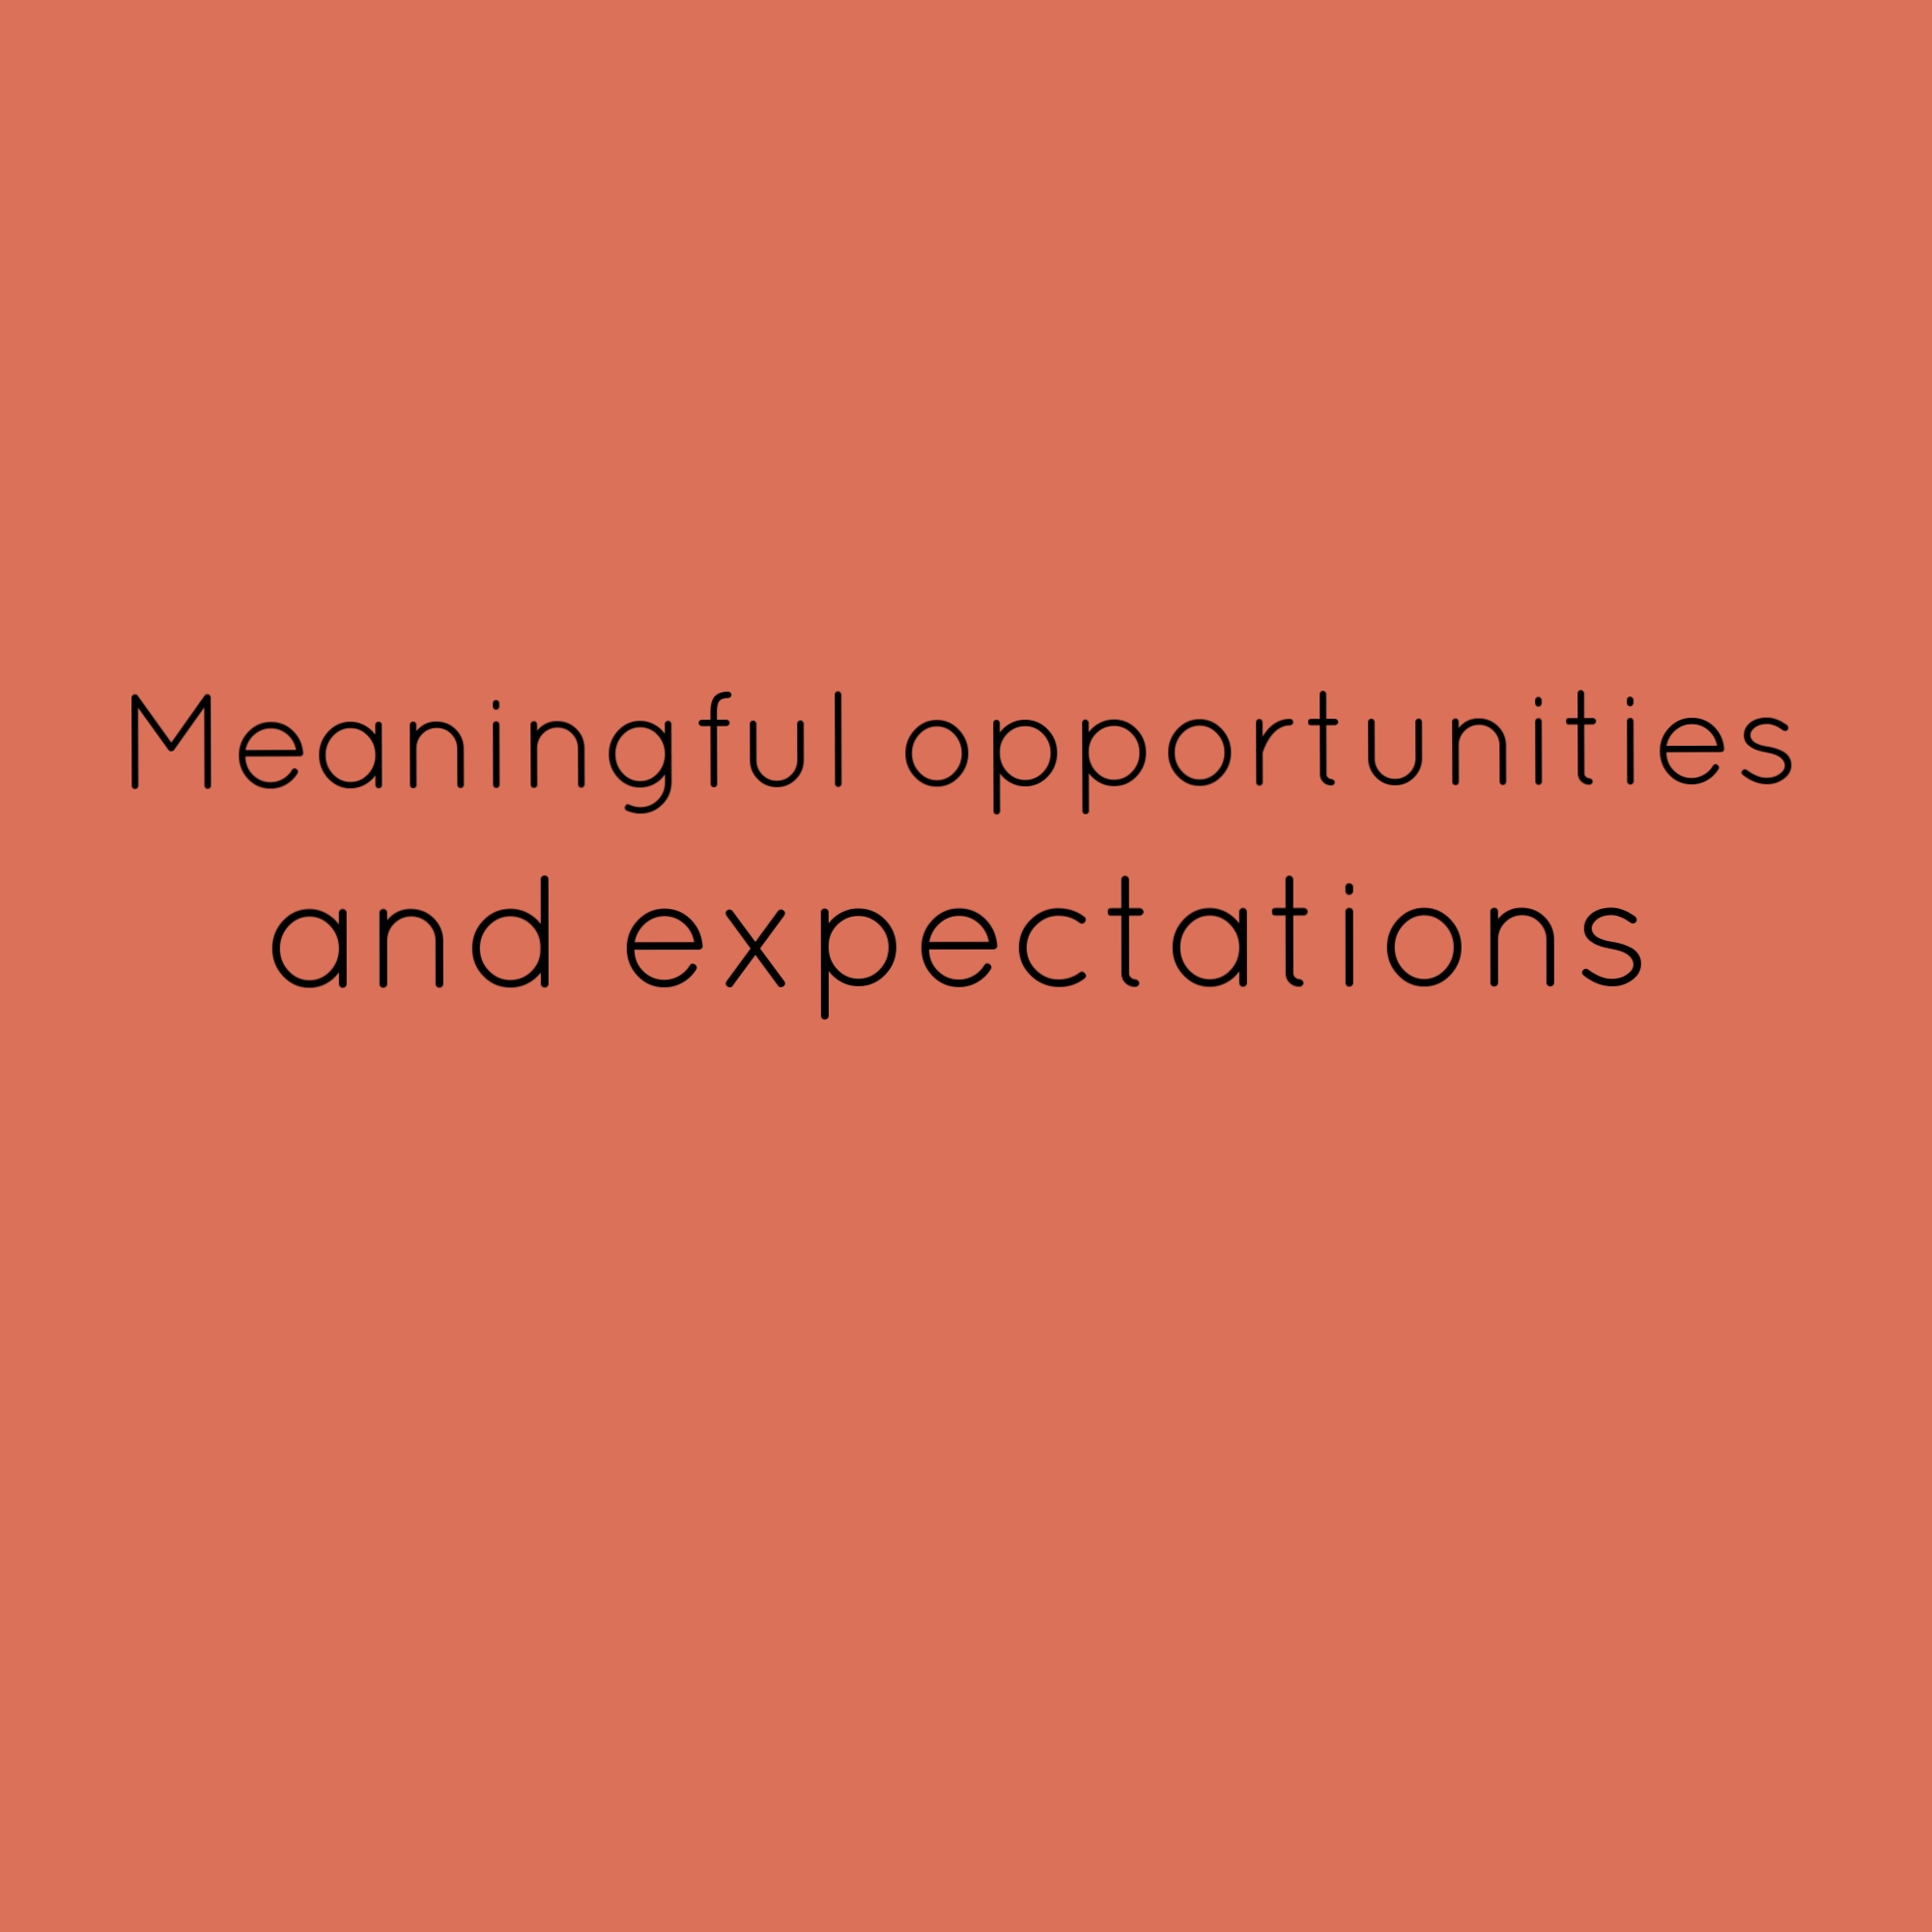 4. Meaningful opportunities and expectations